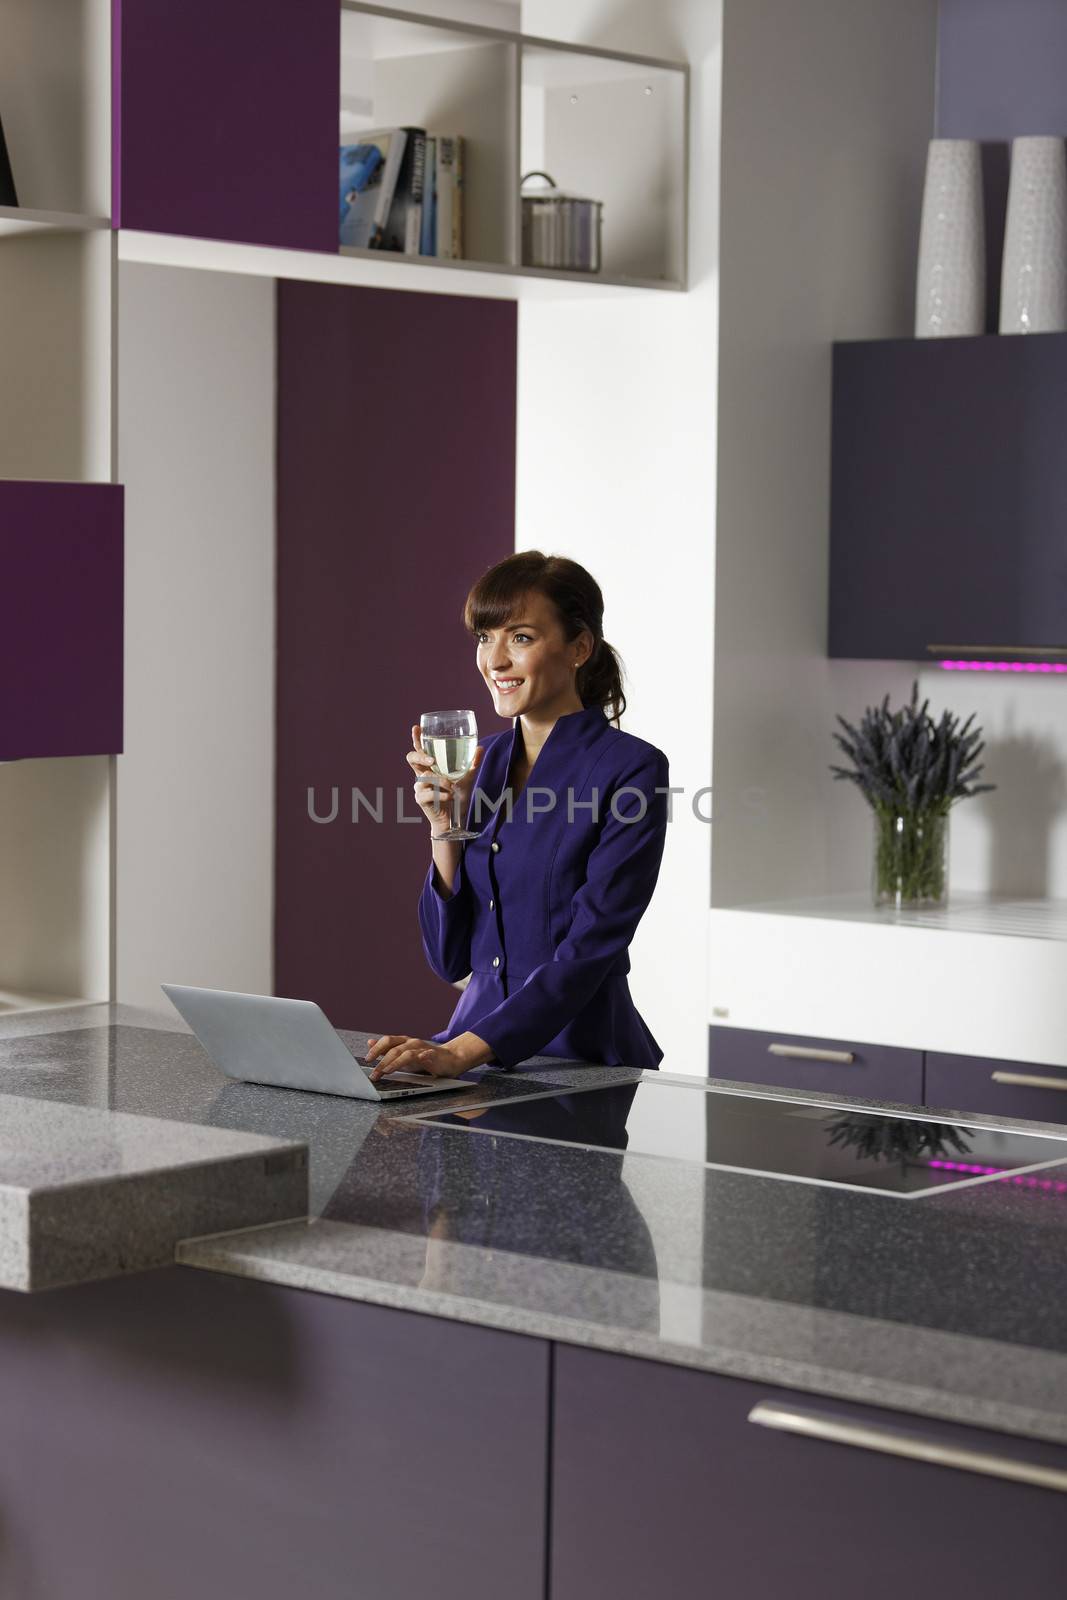 Smart business woman working on her laptop at home in kitchen.